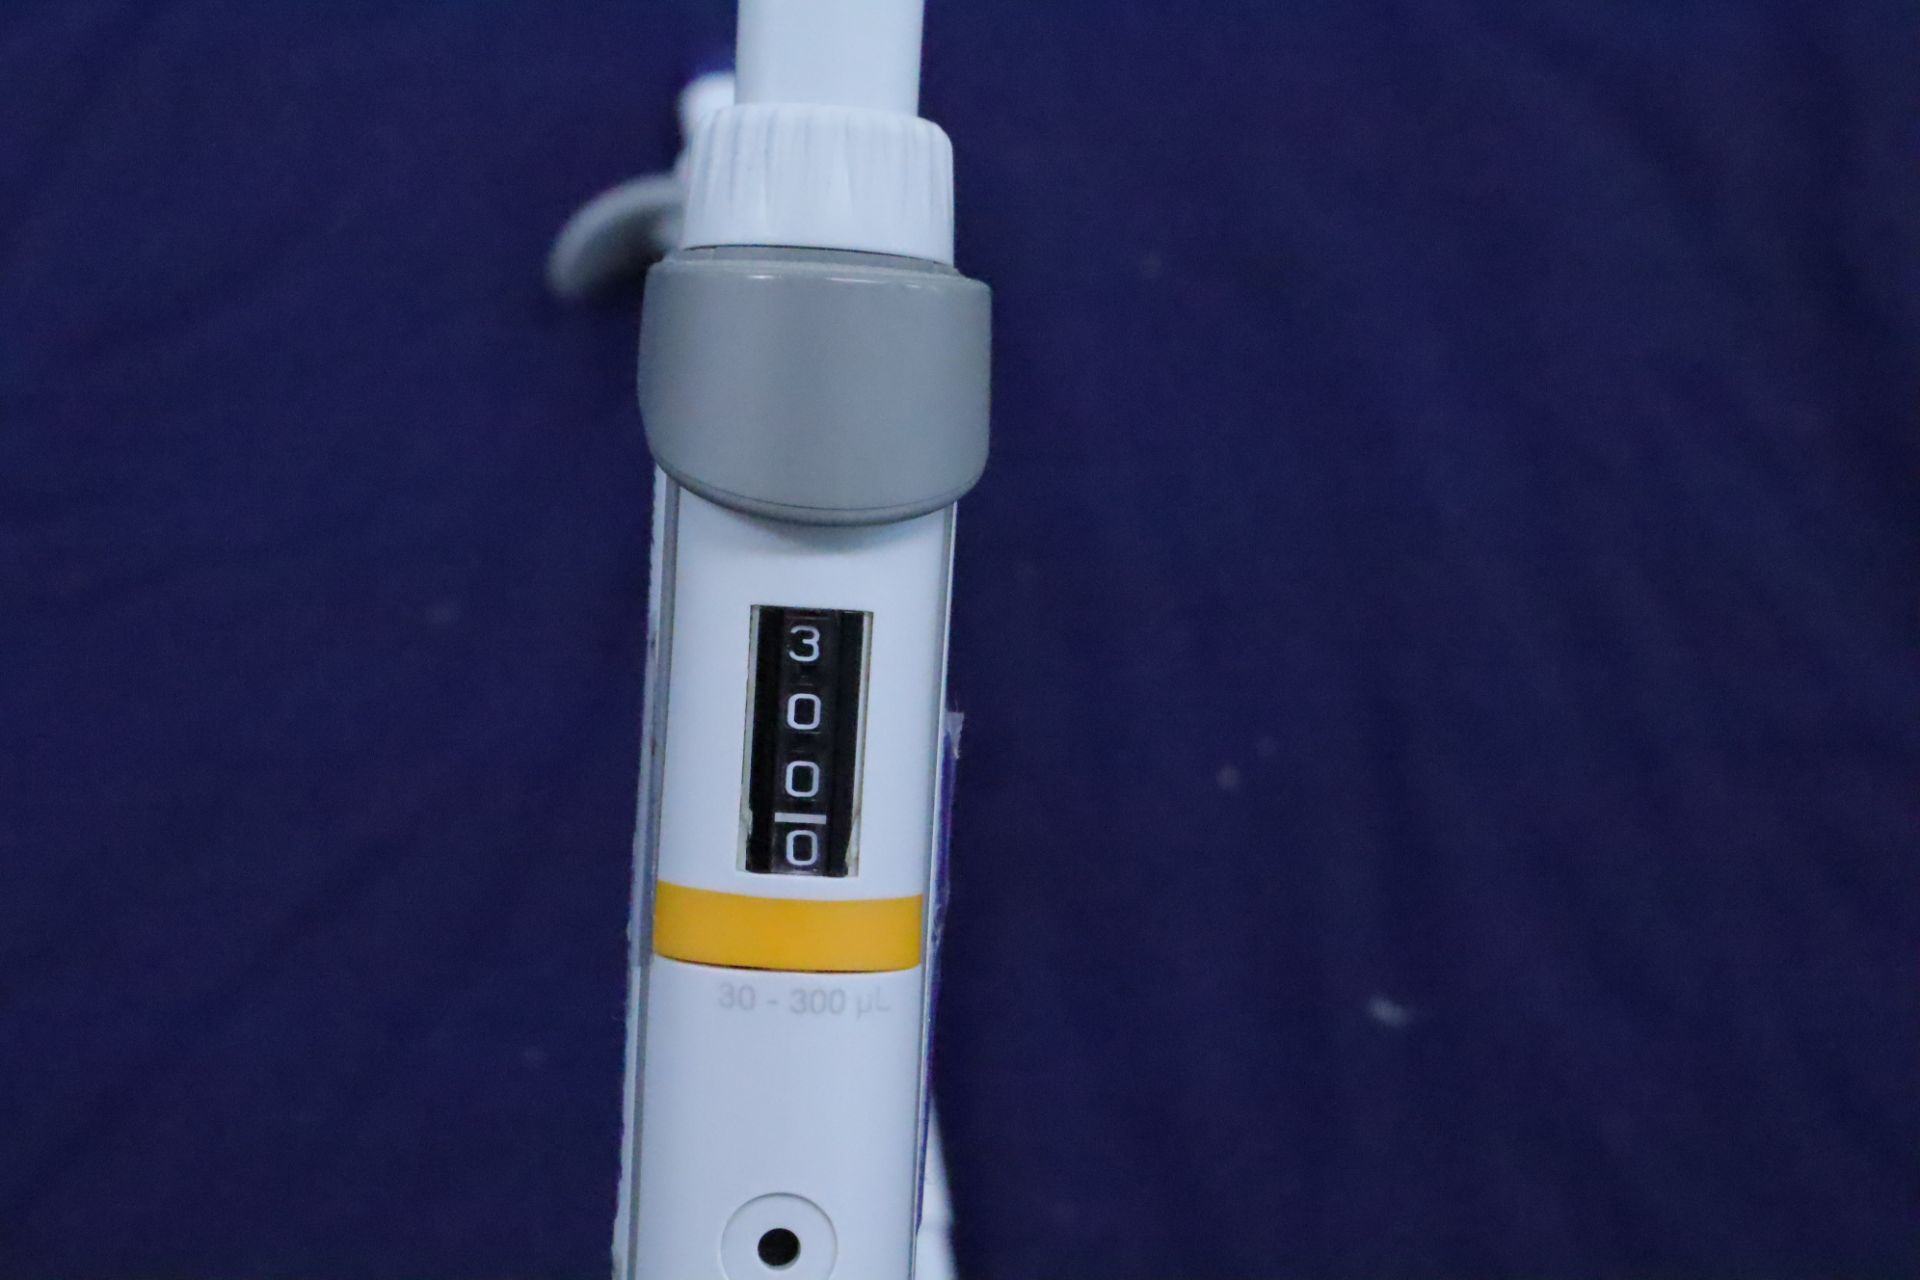 Eppendorf Research Plus Adjustable Volume Pipette (Qty 3) - Image 6 of 11